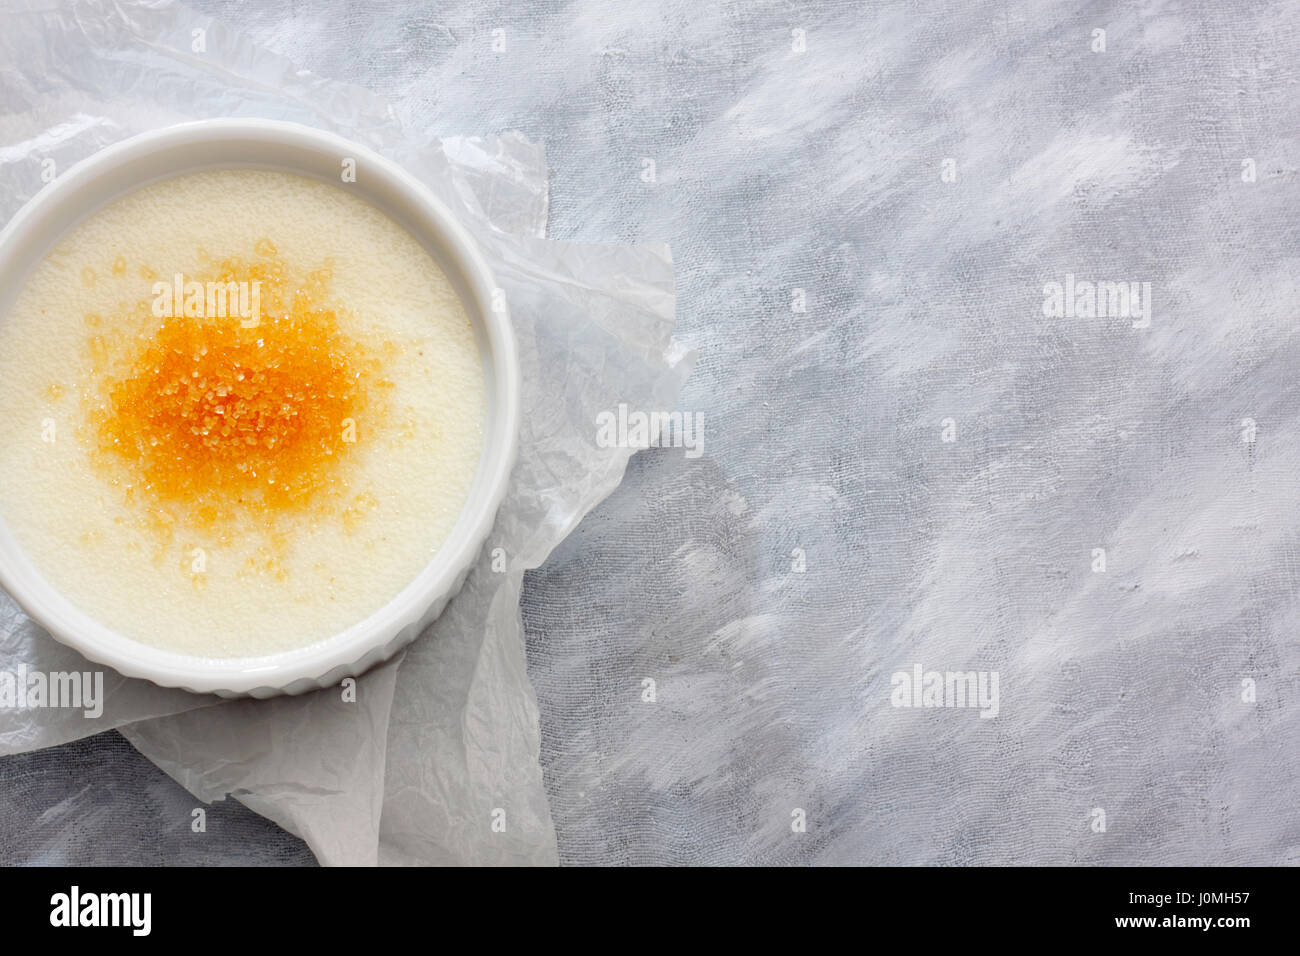 Wheat semolina (farina) with milk and brown cane sugar in a ceramic bowl on paper cloth. View from above. Stock Photo